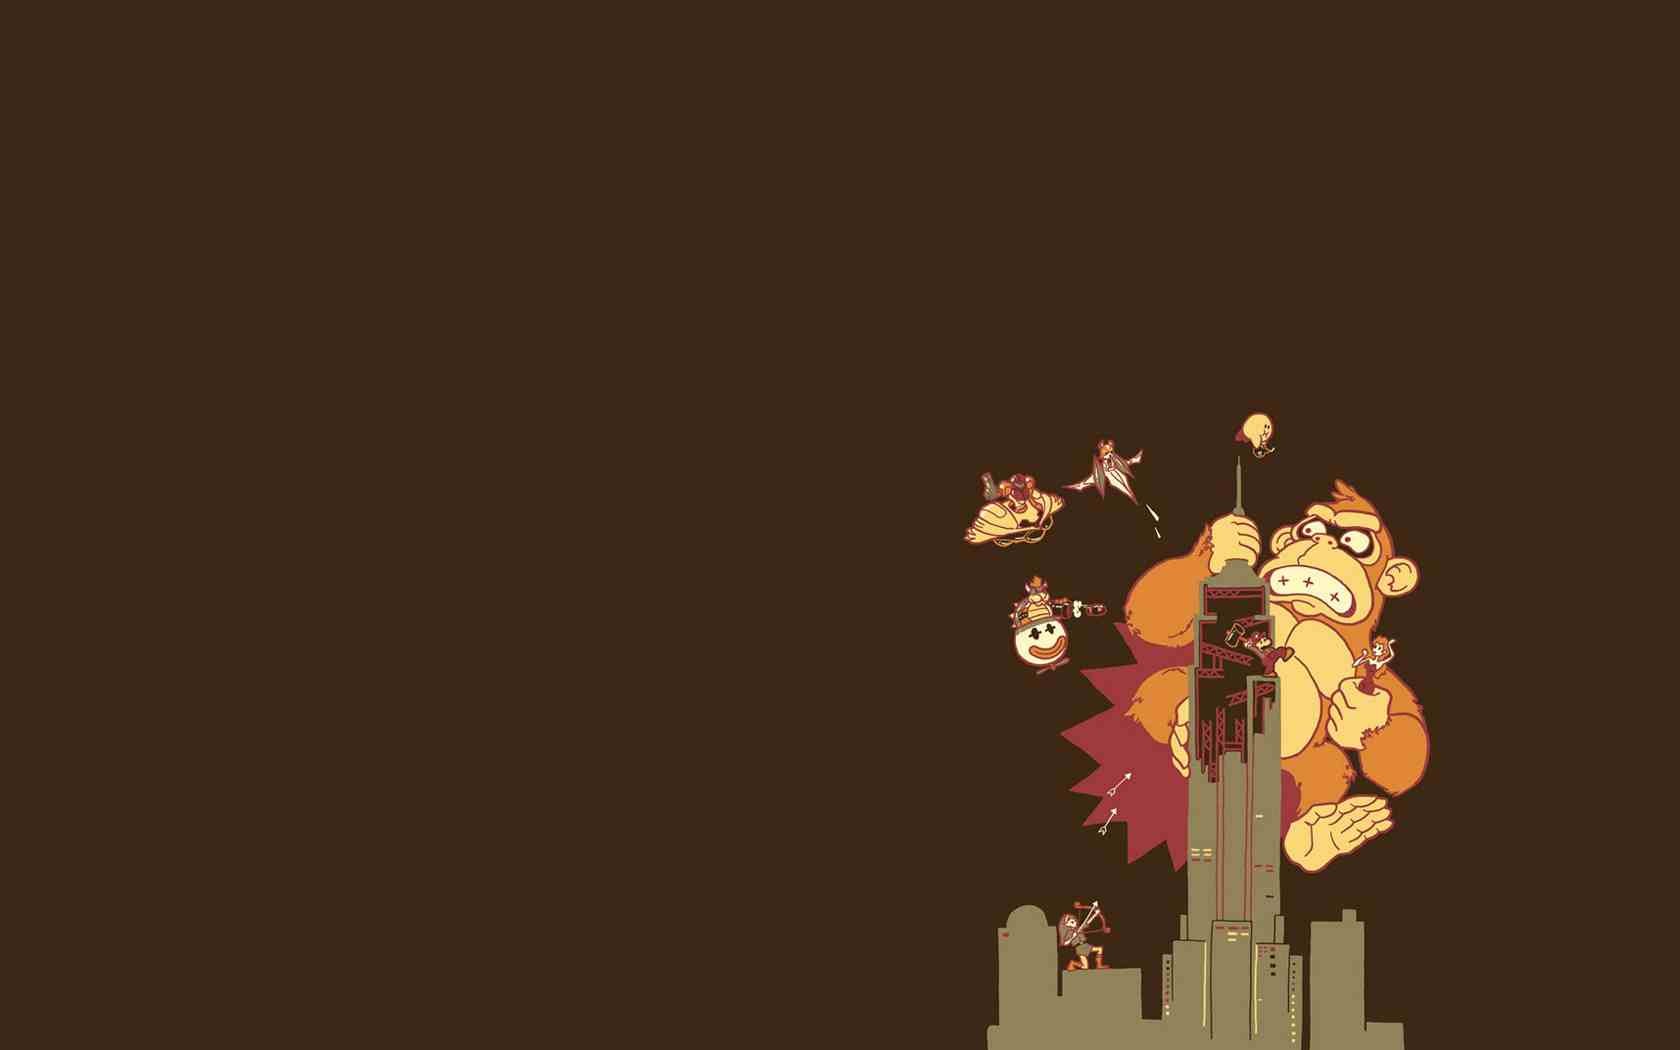 General 1680x1050 Donkey Kong minimalism video game art humor brown background simple background video games